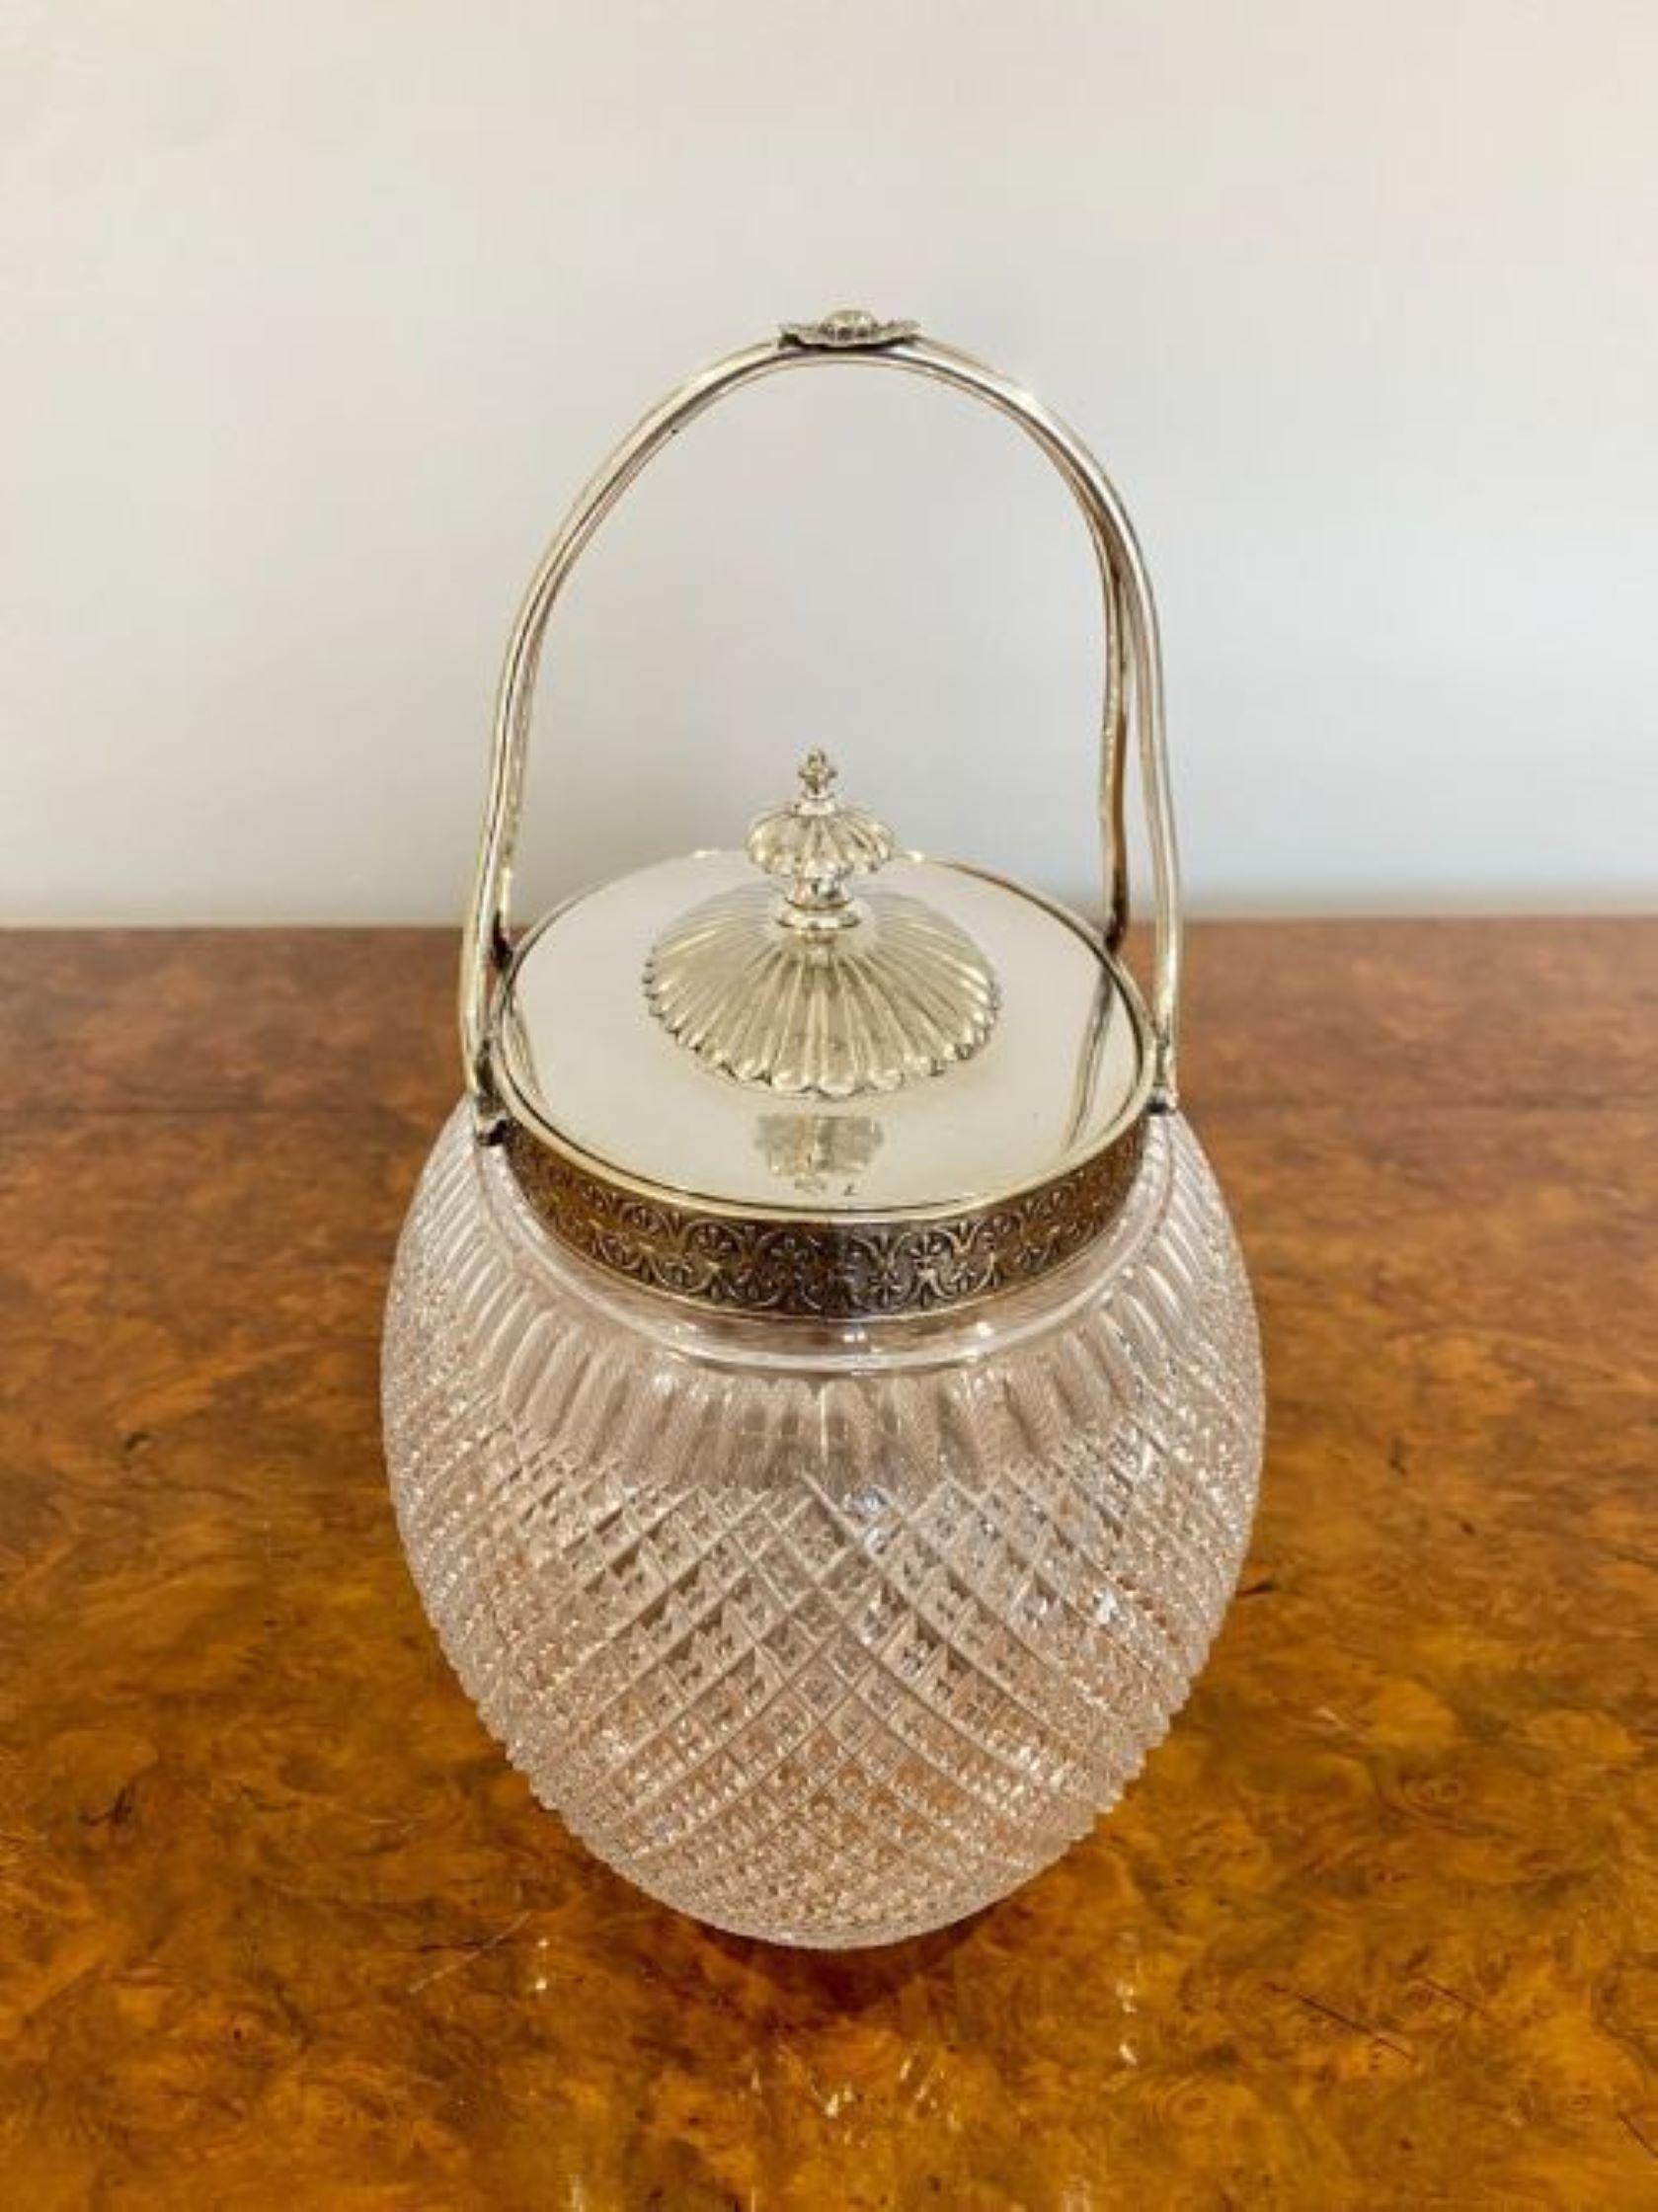 Fantastic Quality Antique Victorian Cut Glass & Silver Plated Biscuit Barrel  In Good Condition For Sale In Ipswich, GB